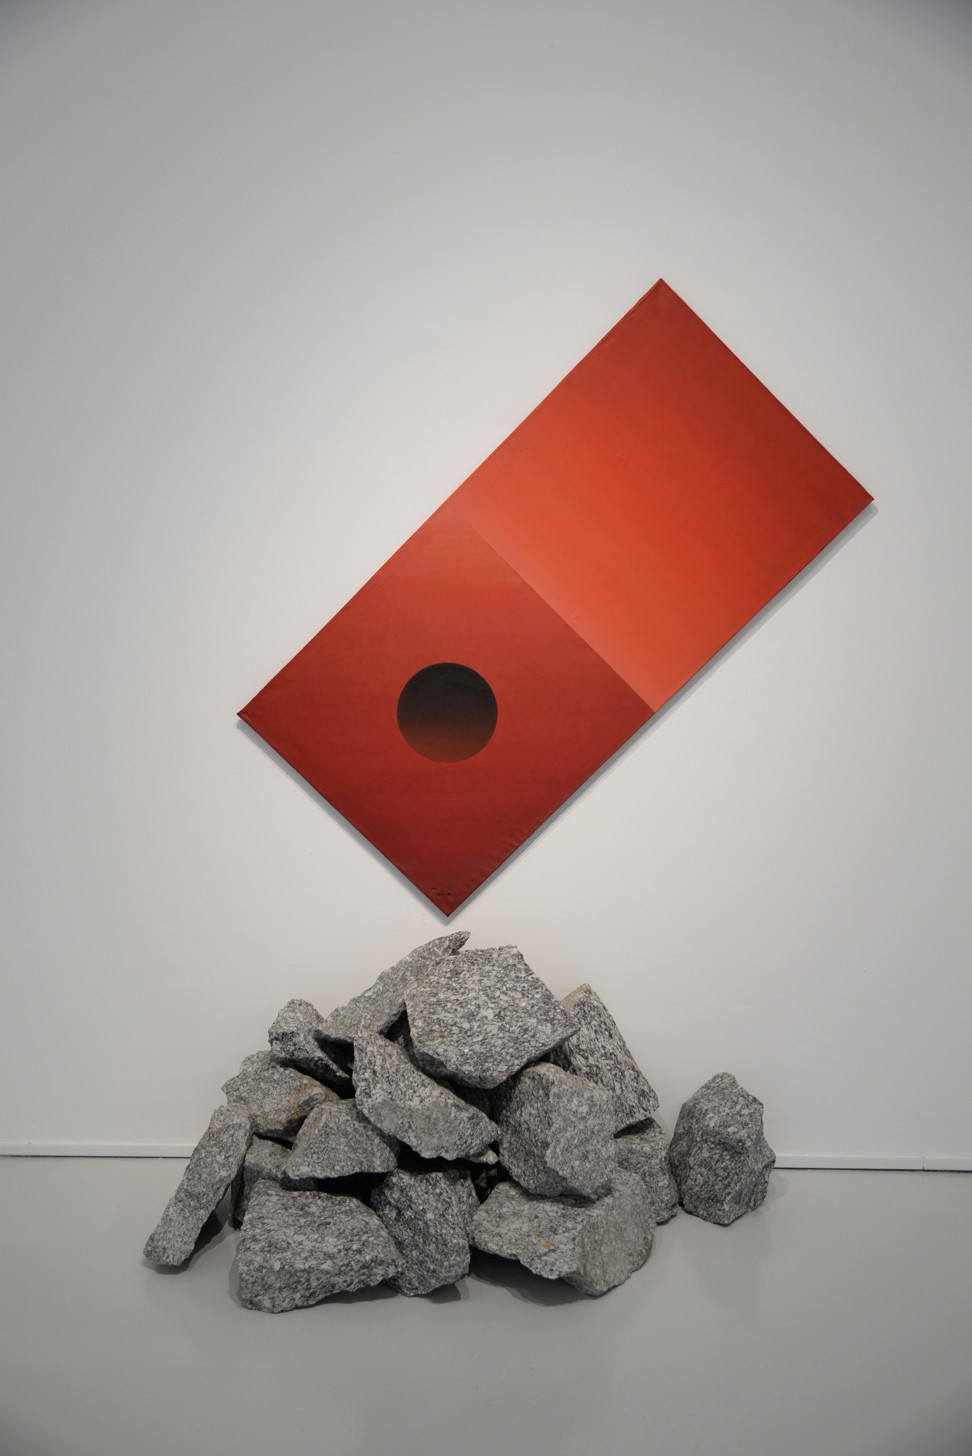 Red Cube (1986), Po Po. Courtesy of the artist and Yavuz Gallery